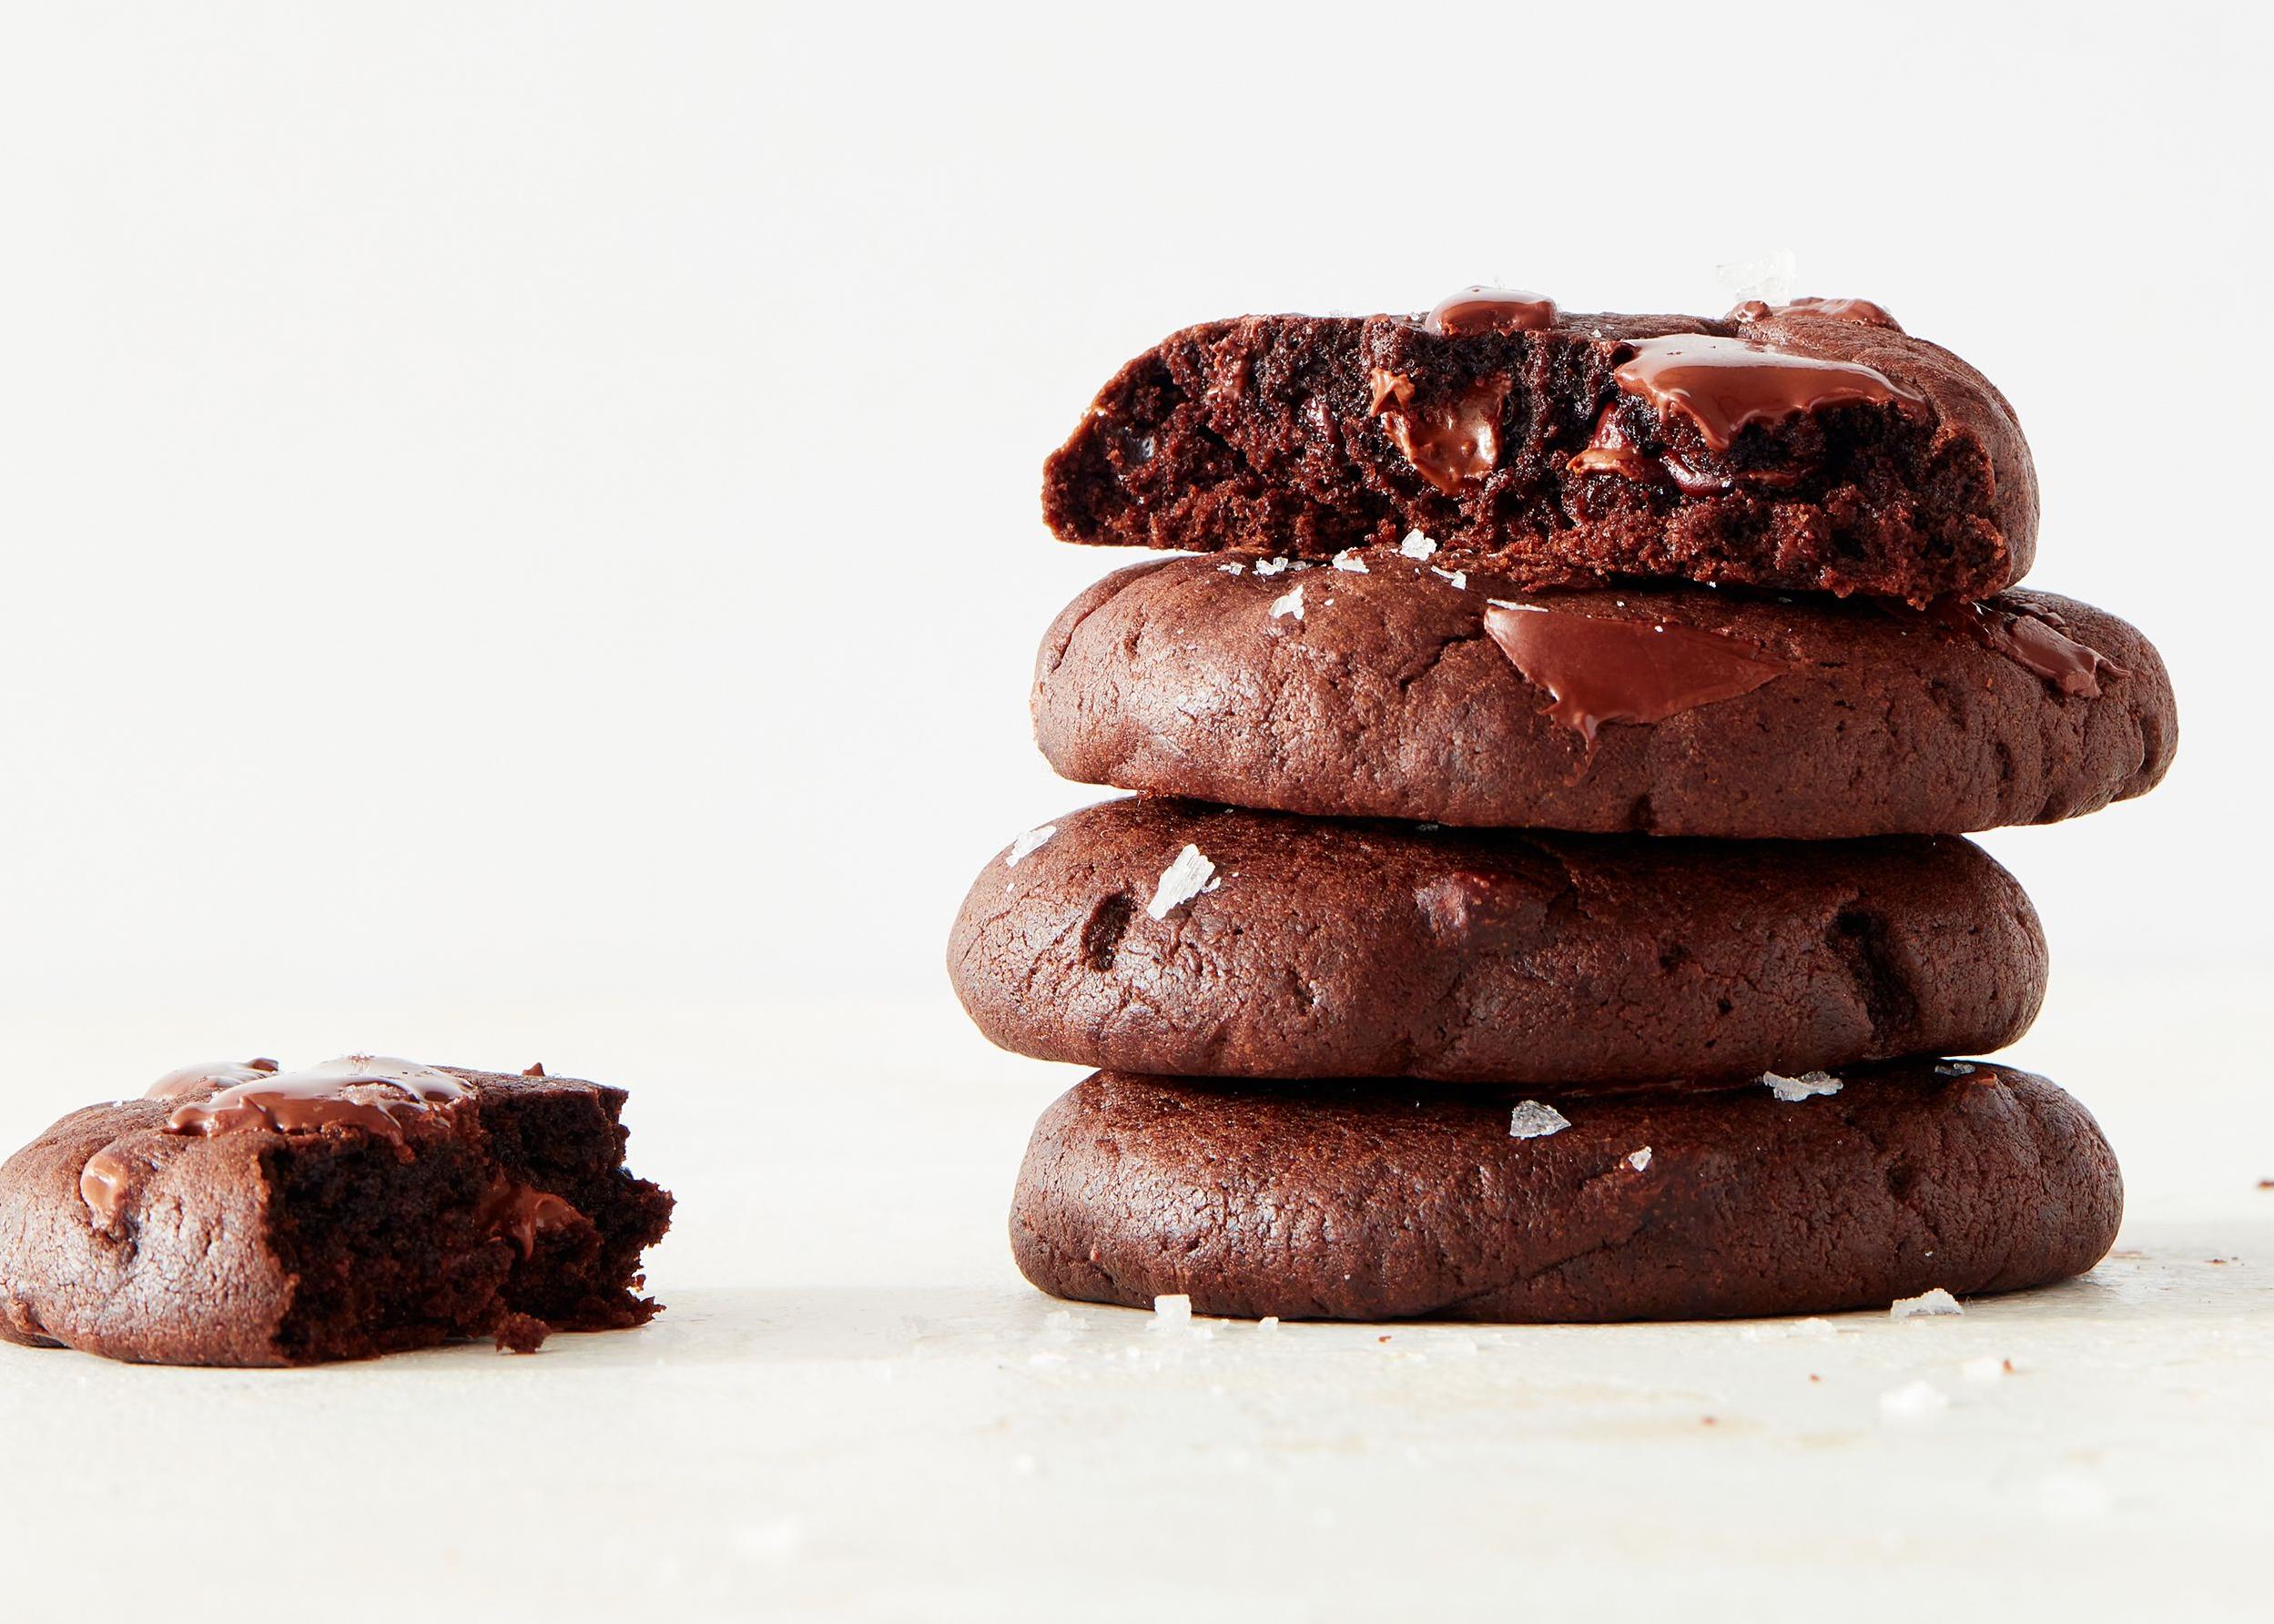  A cookie that's perfect for when you want something sweet but also need a caffeine boost.